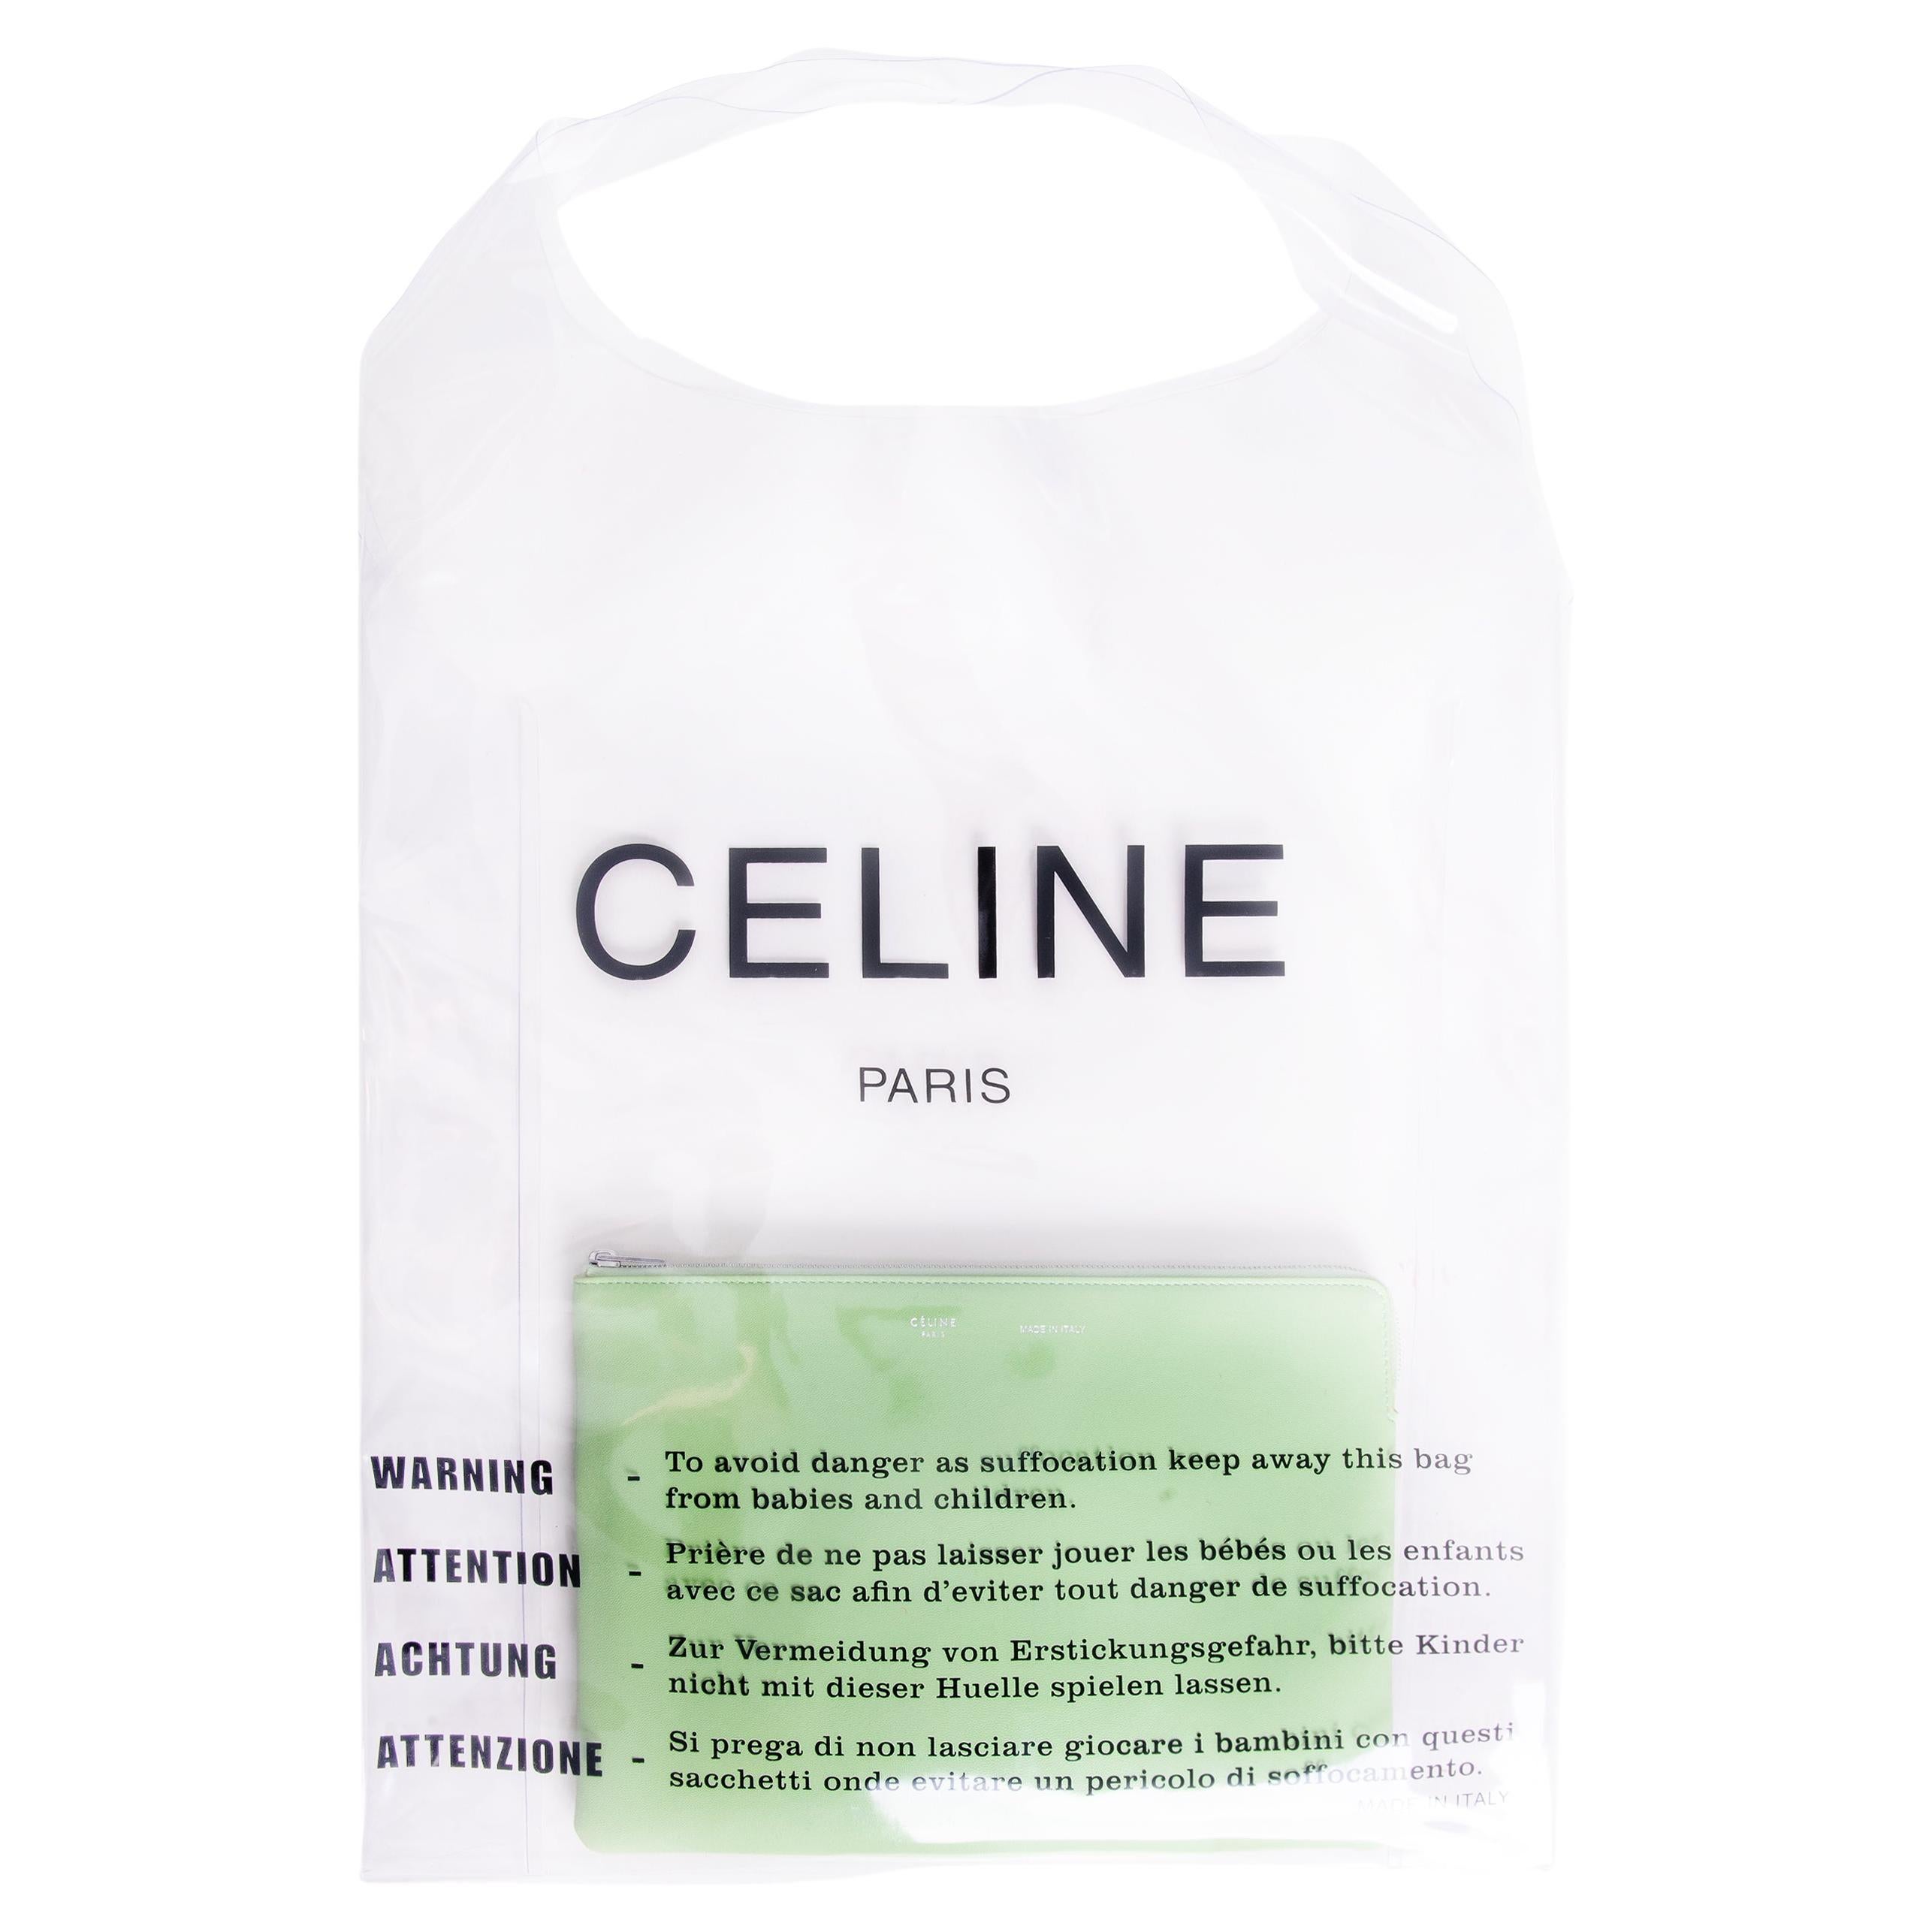 S/S 2018 Old Céline by Phoebe Philo PVC Handbag with Green Interior Clutch For Sale